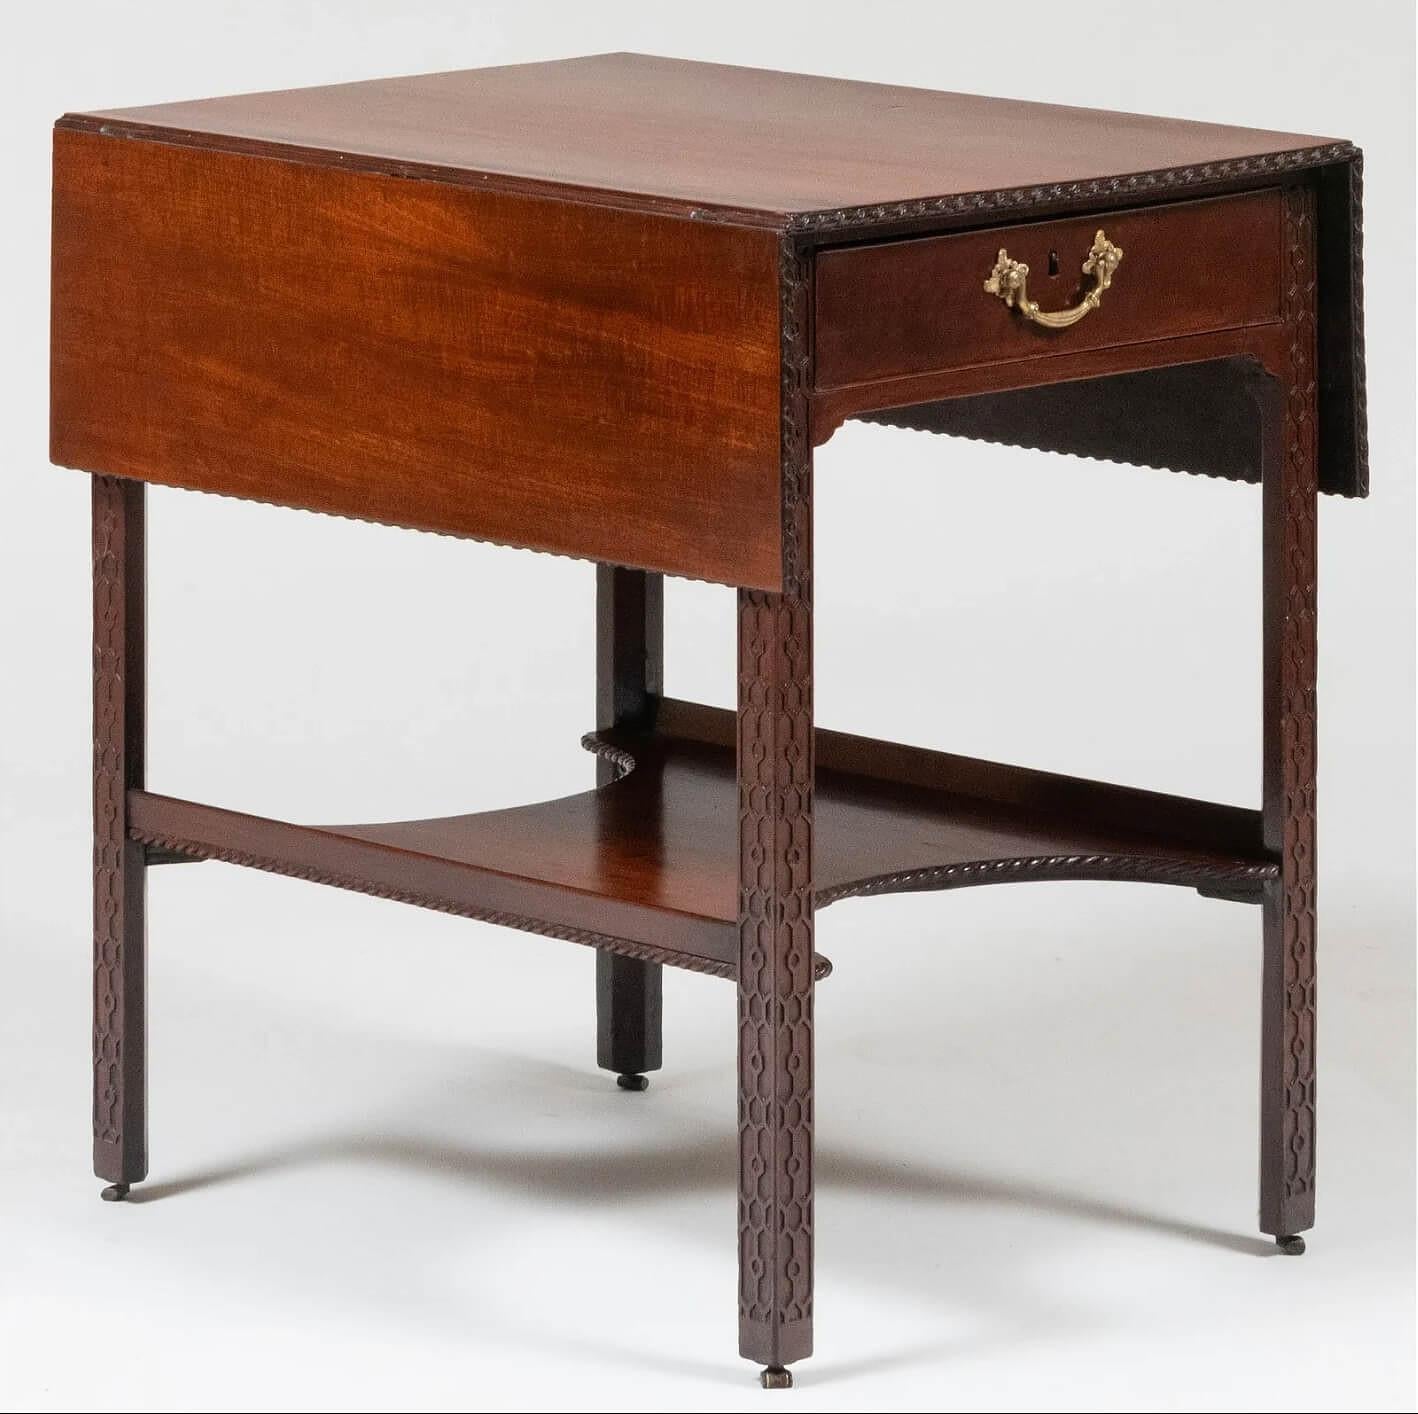 A very fine English late George II, early George III period circa 1760 mahogany Pembroke or drop-leaf table of Chippendale design, the rectangular single-board top with drop-sides and spiral-ribbon carved edges above shallow opposing drawers with